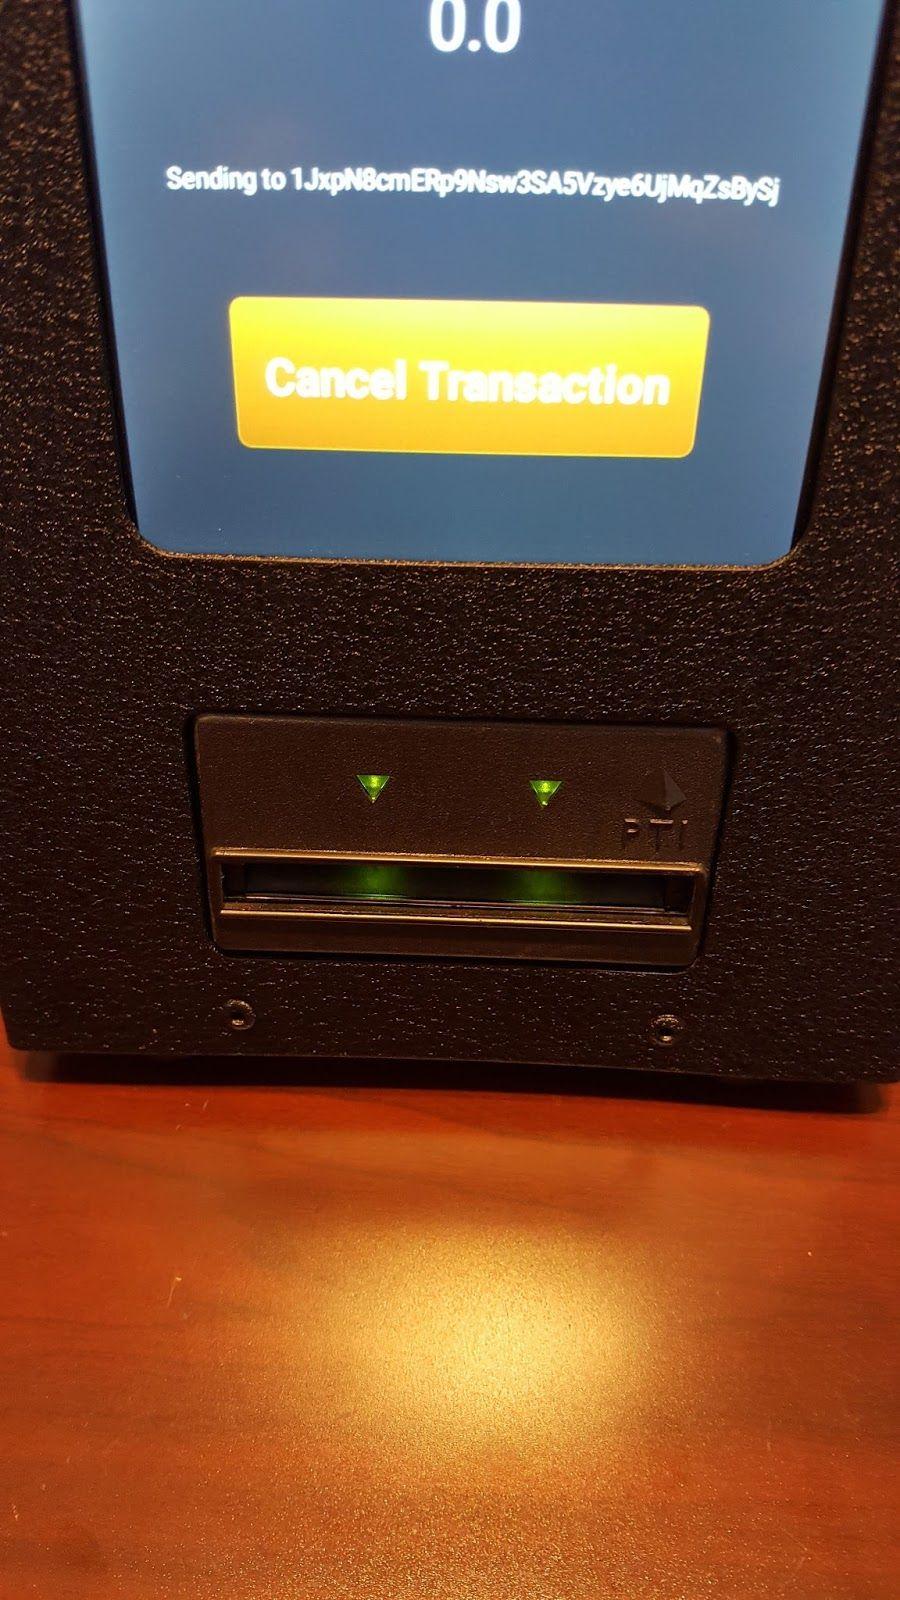 Once all bills have been inserted, tap the complete transaction button, BTC will be sent instantly to